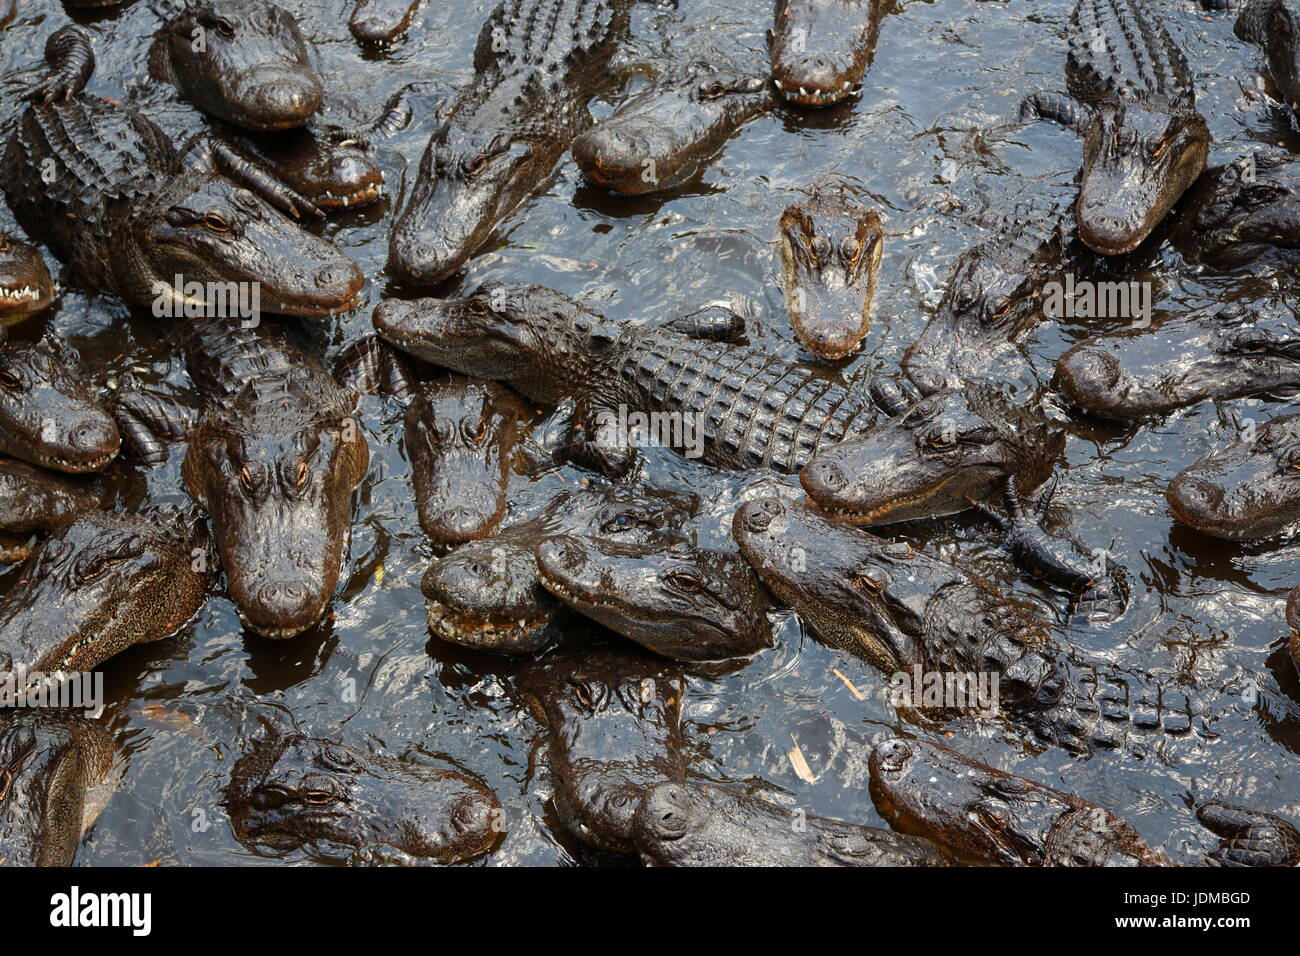 American alligators, Alligator mississippiensis, on the water's surface. Stock Photo